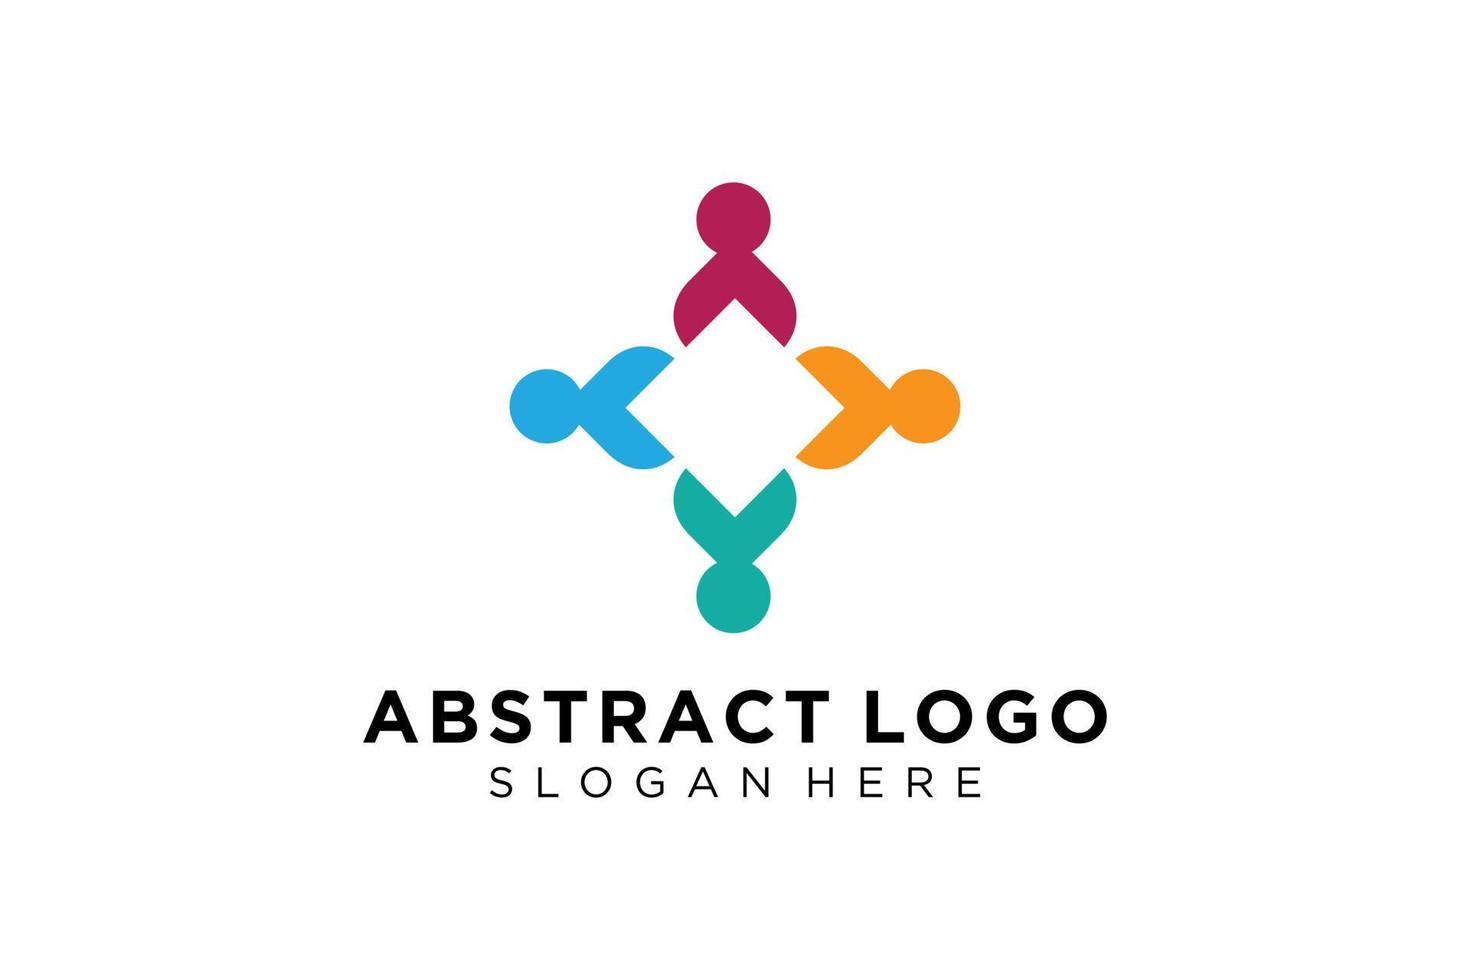 Vector abstract people and family logo collection,people icons, health logo template, care symbol.